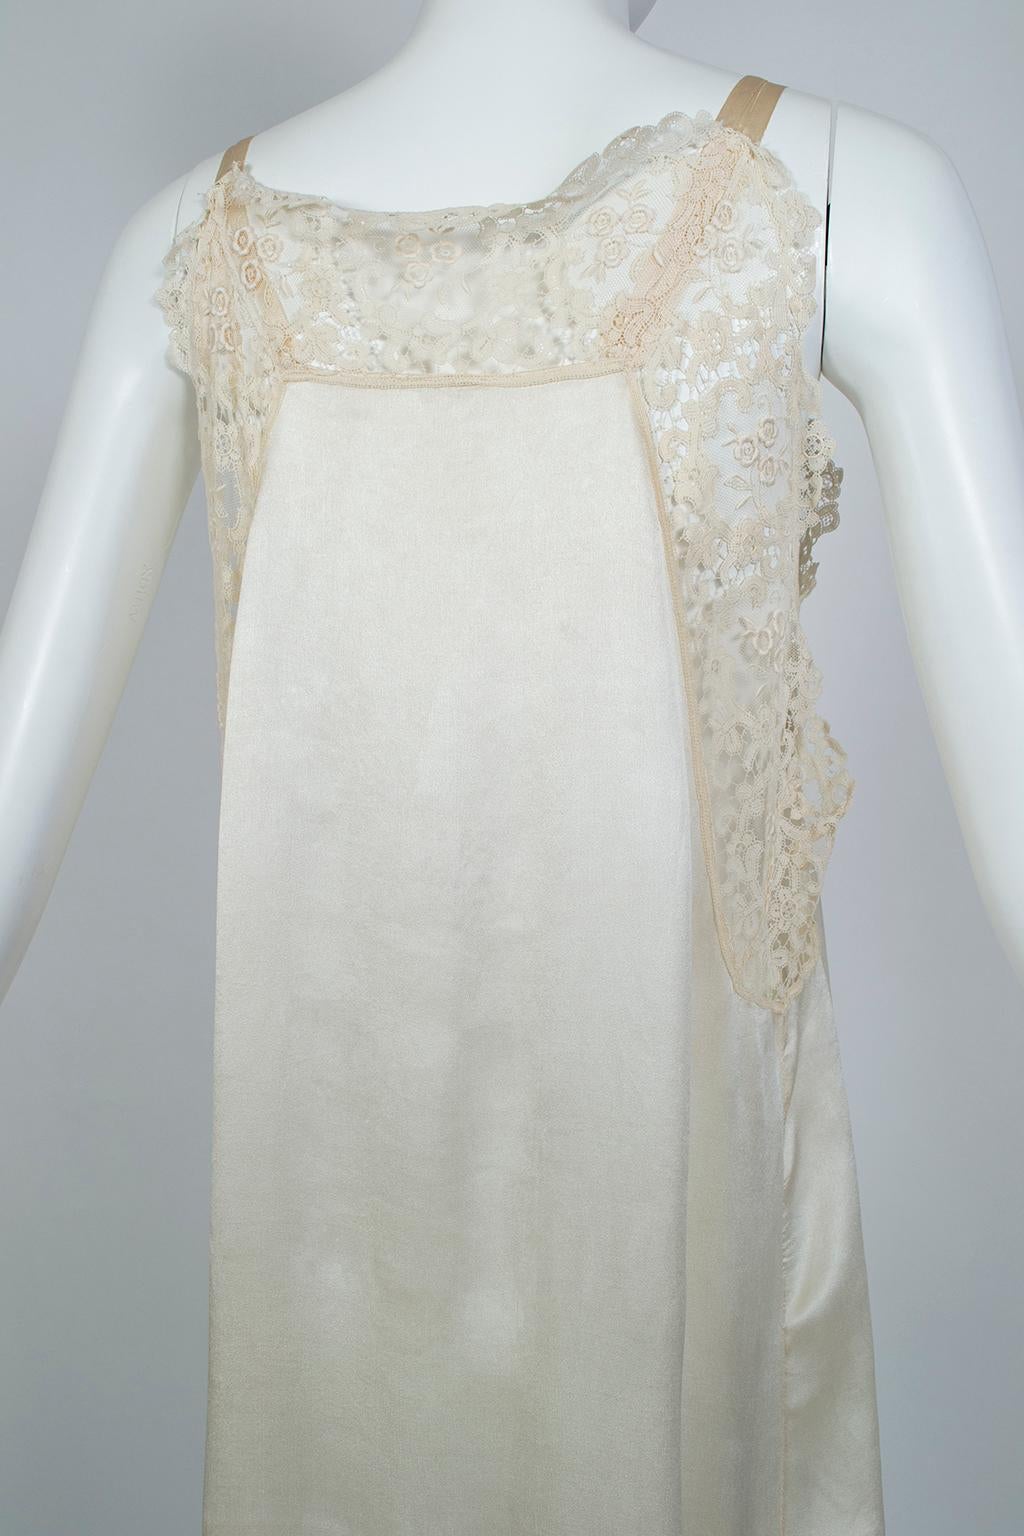 Women's Edwardian Charmeuse and Lace Dressing Gown, 1924